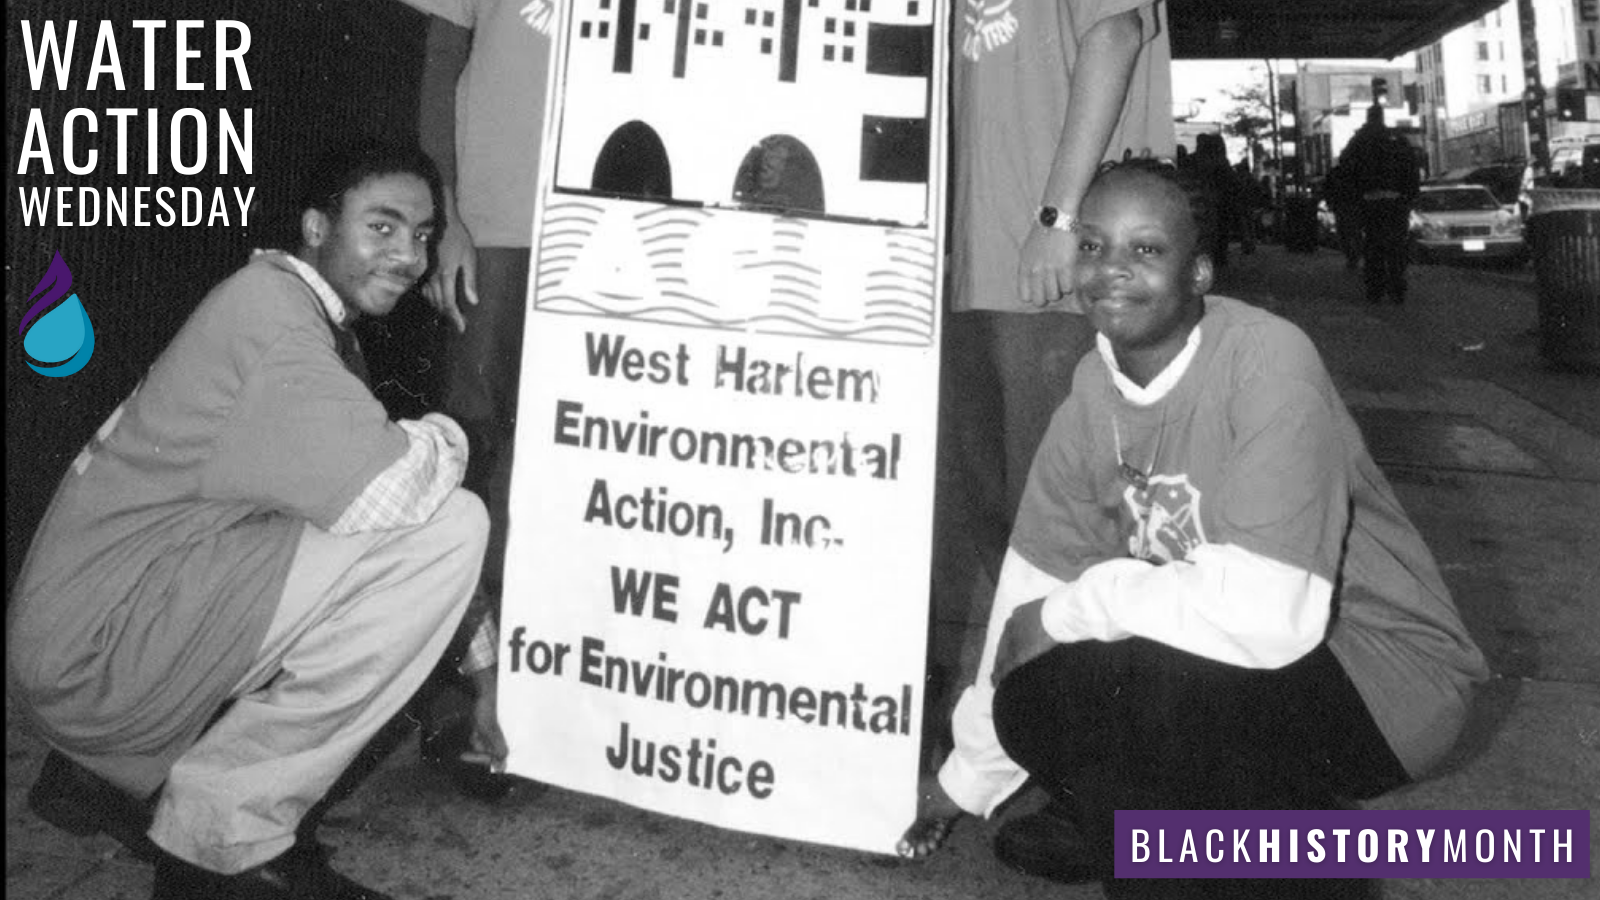 Black and white photo posing next to sign: "West Harlem Environmental Action, Inc. WE ACT for Environmental Justice". Caption: Water Action Wednesday